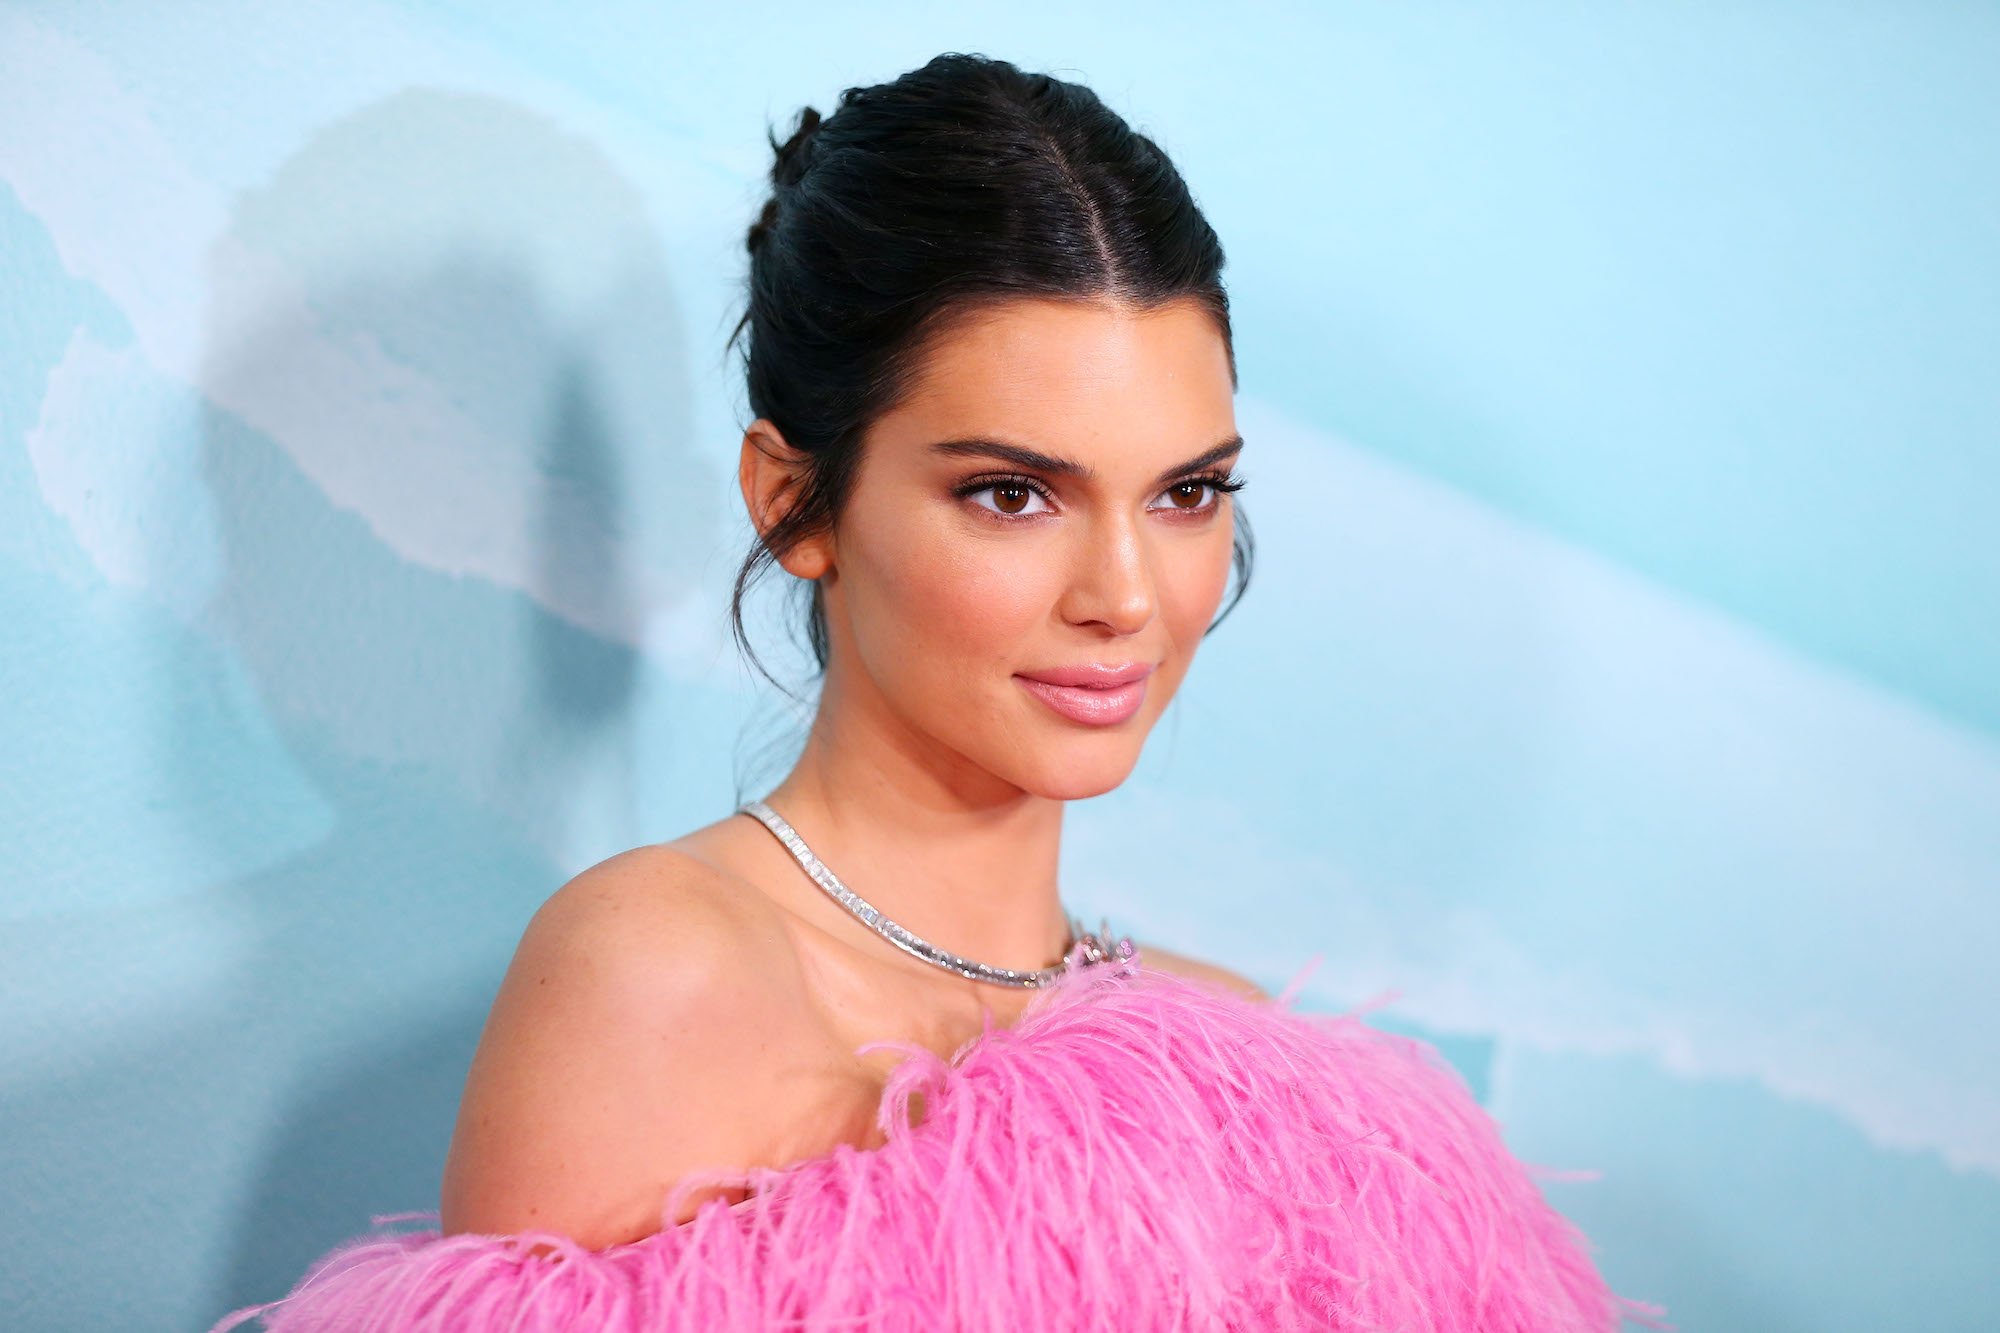 Kendall Jenner smiling standing in front of a blue background